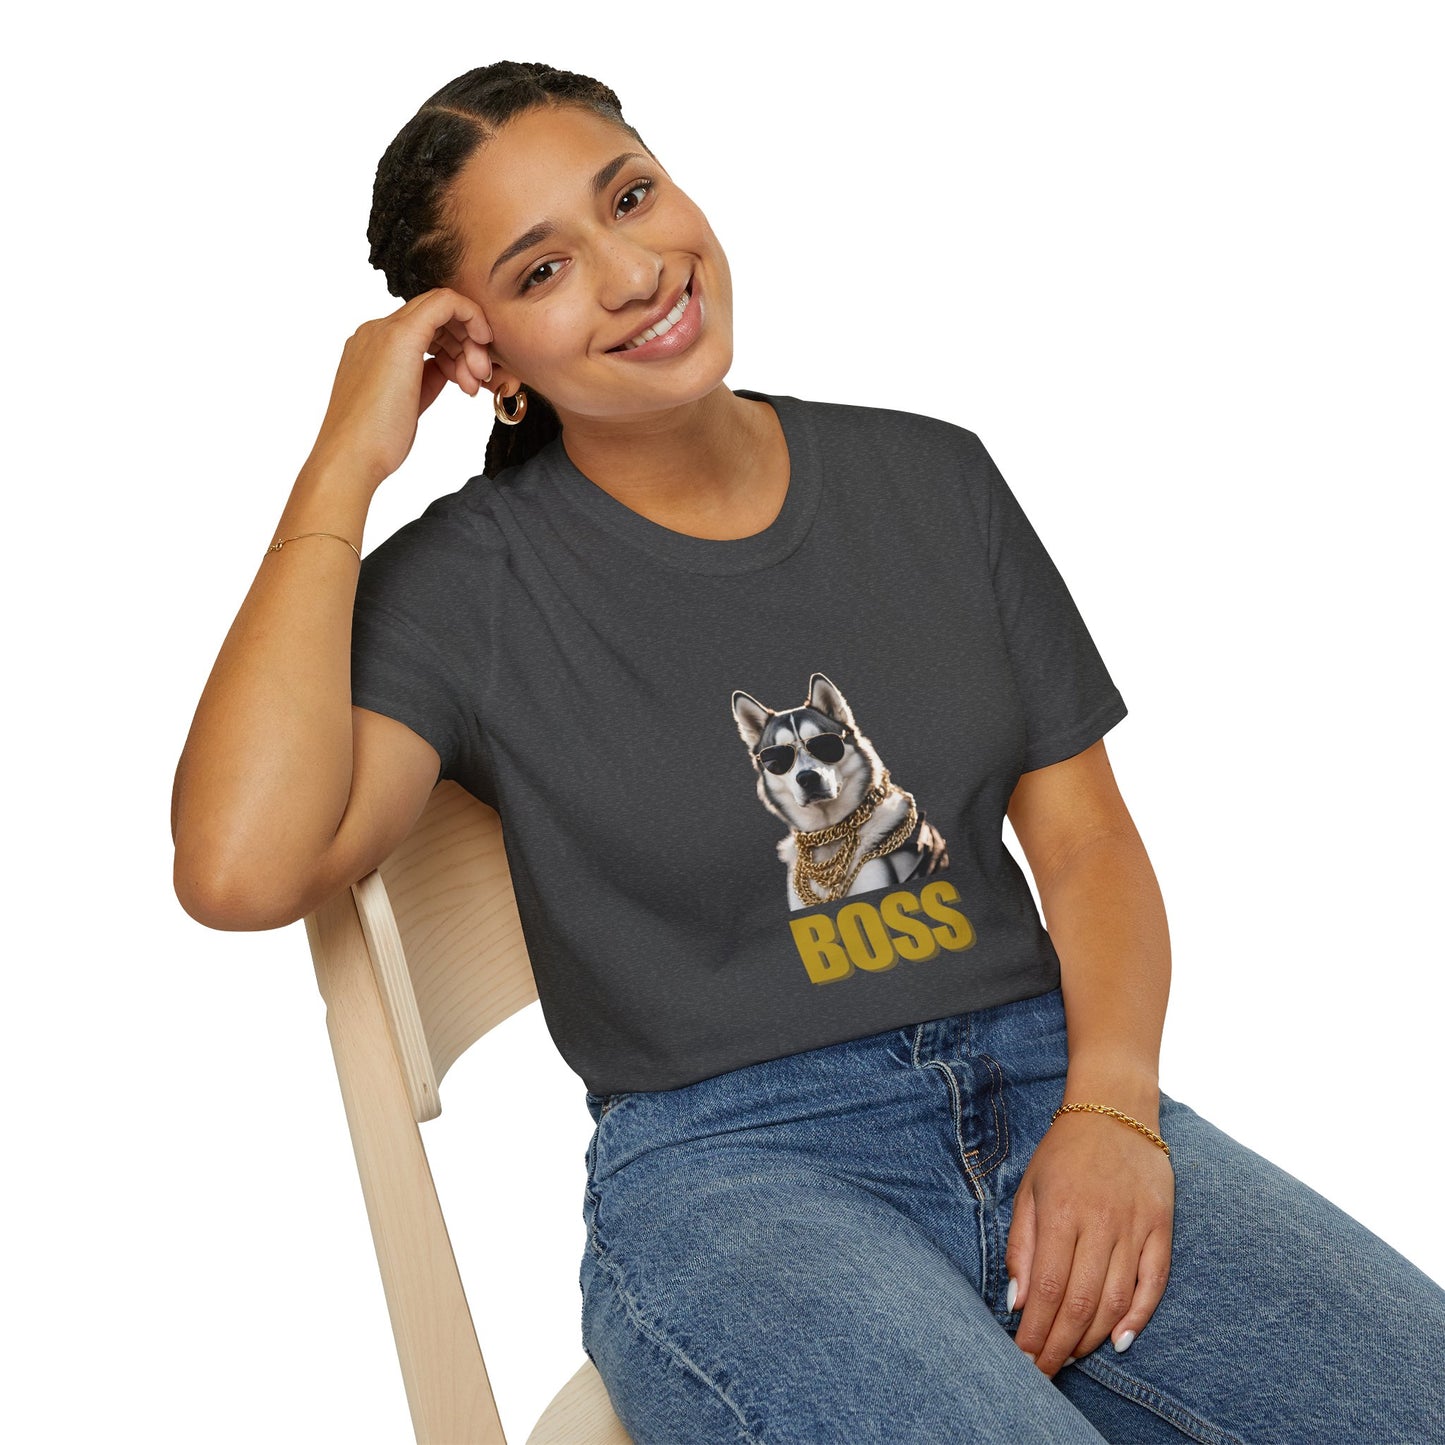 Husky BOSS Tshirt, Graphic T Shirt, Gifts for Her / Him, Dog Lovers Cute Cool Artistic